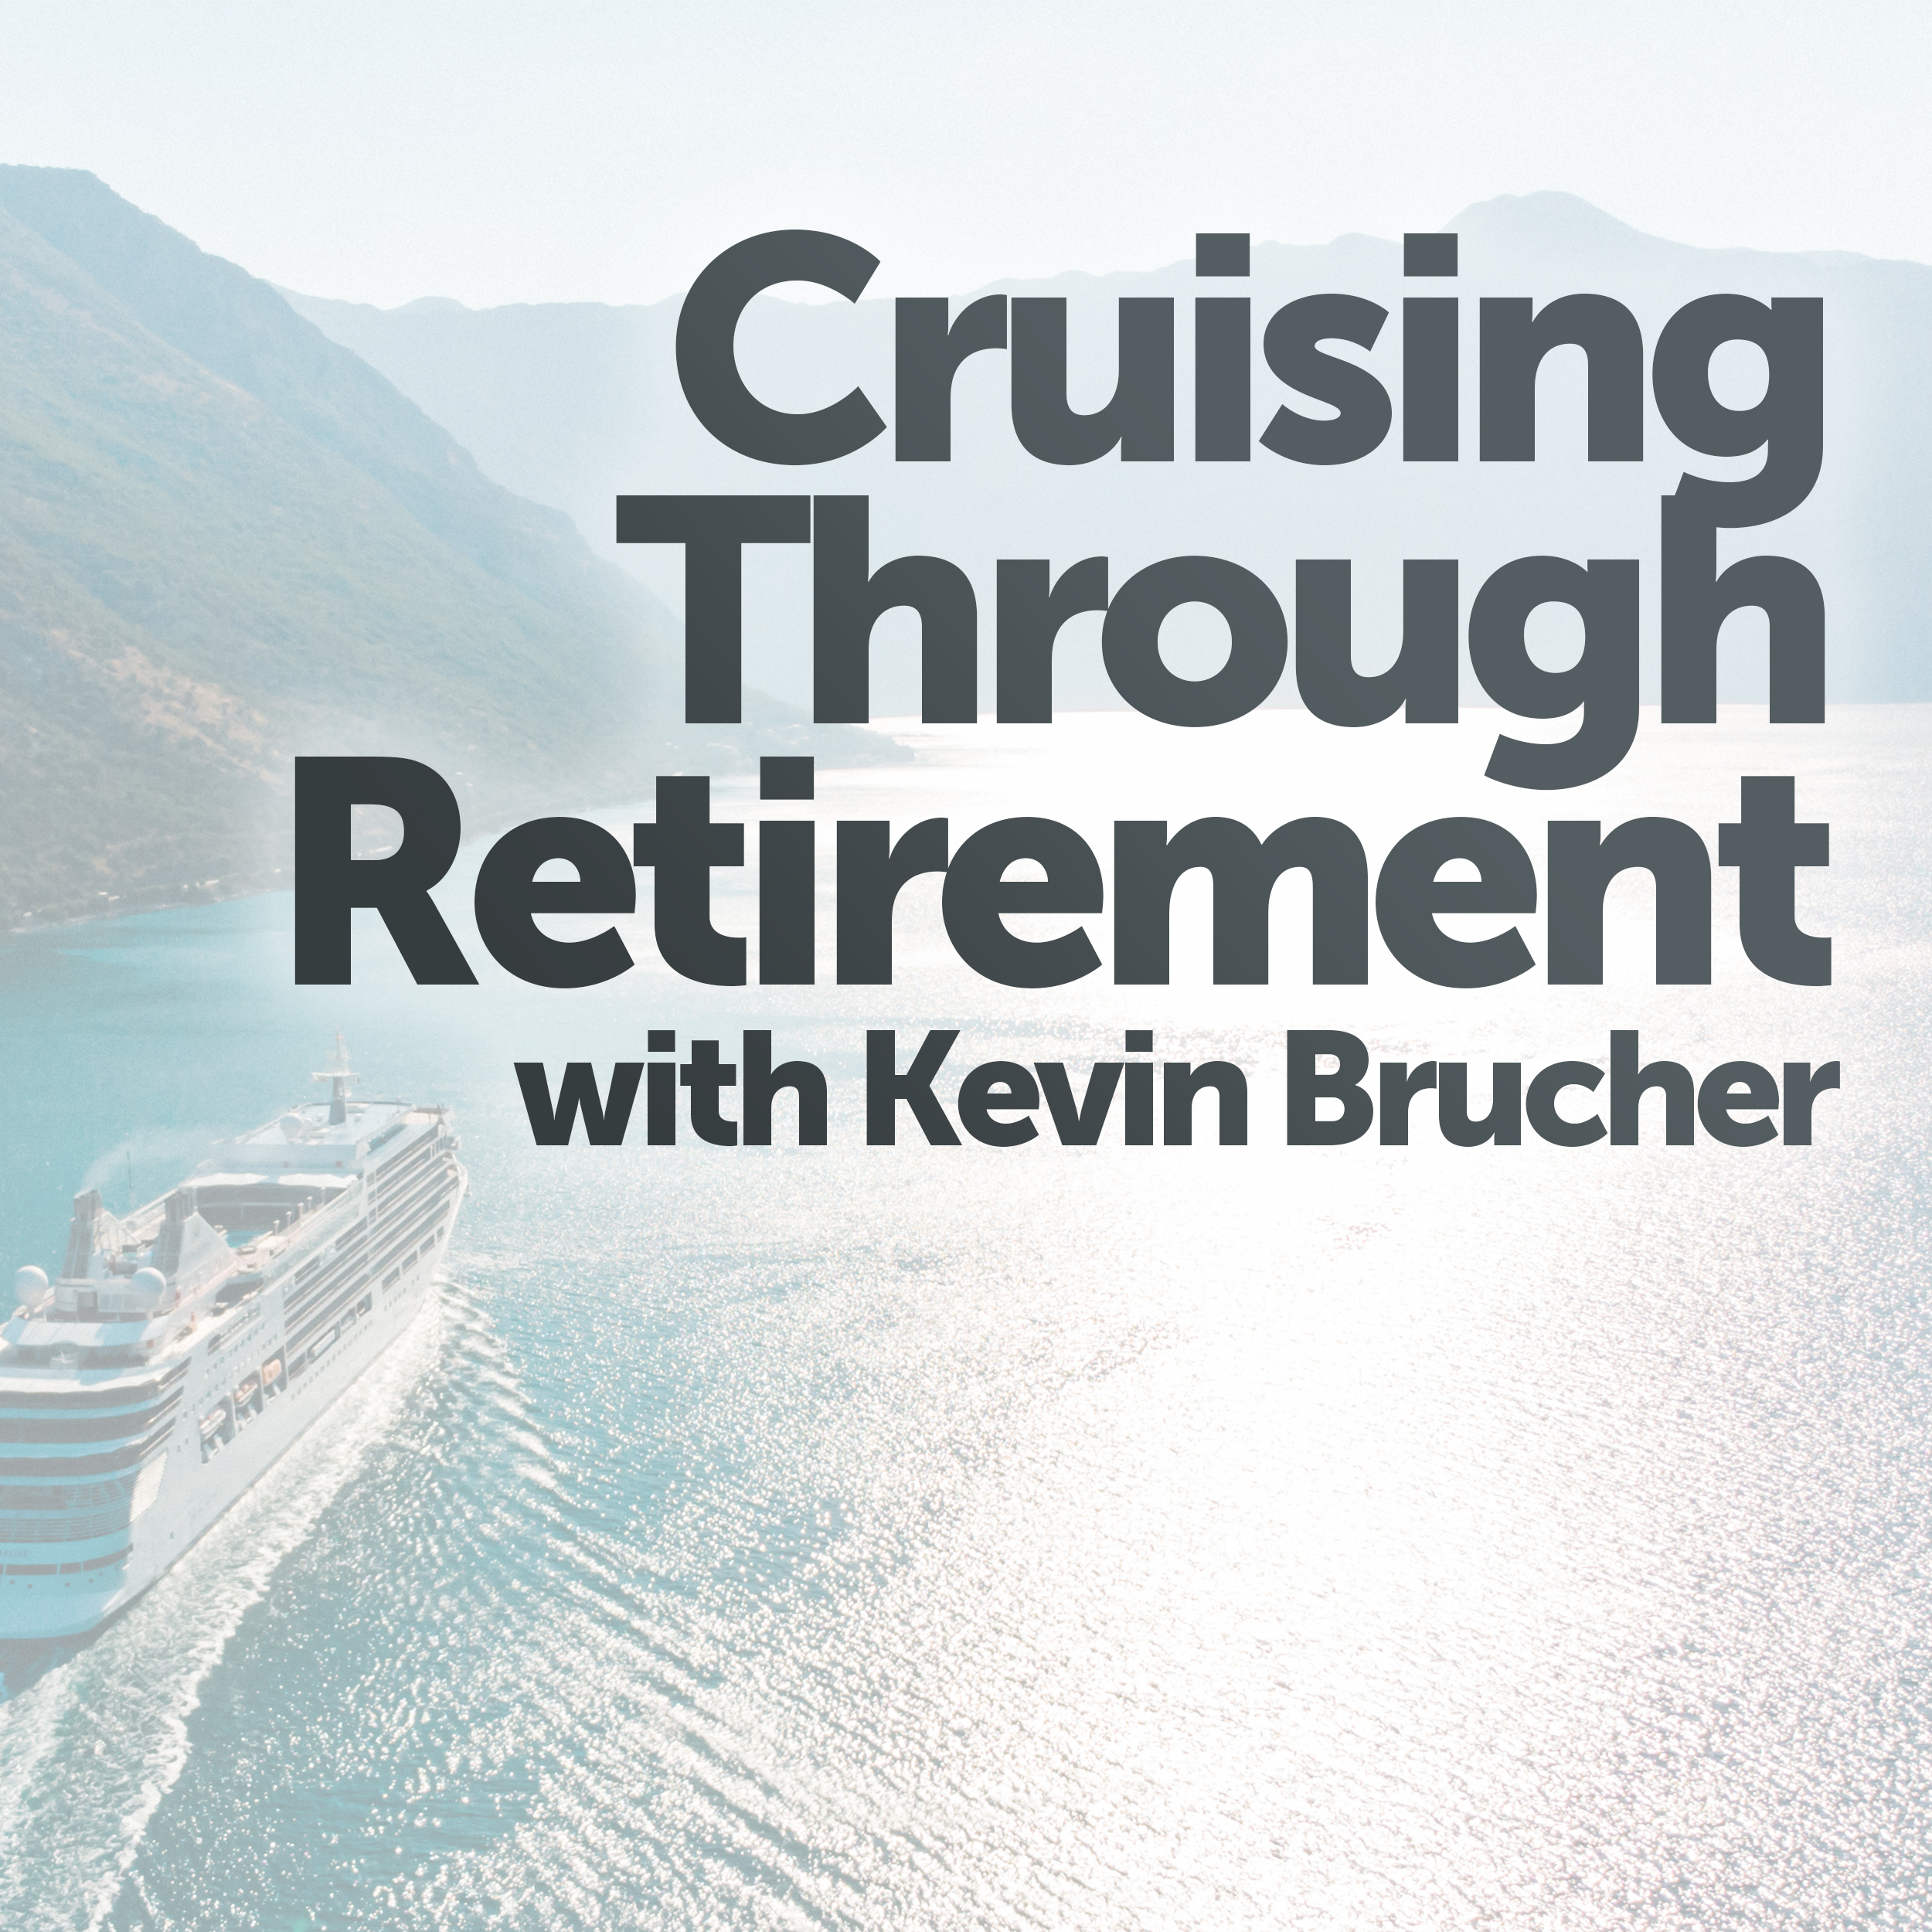 Kevin Brucher exposes the dangers of financial advice on social media and highlights the importance of financial literacy.